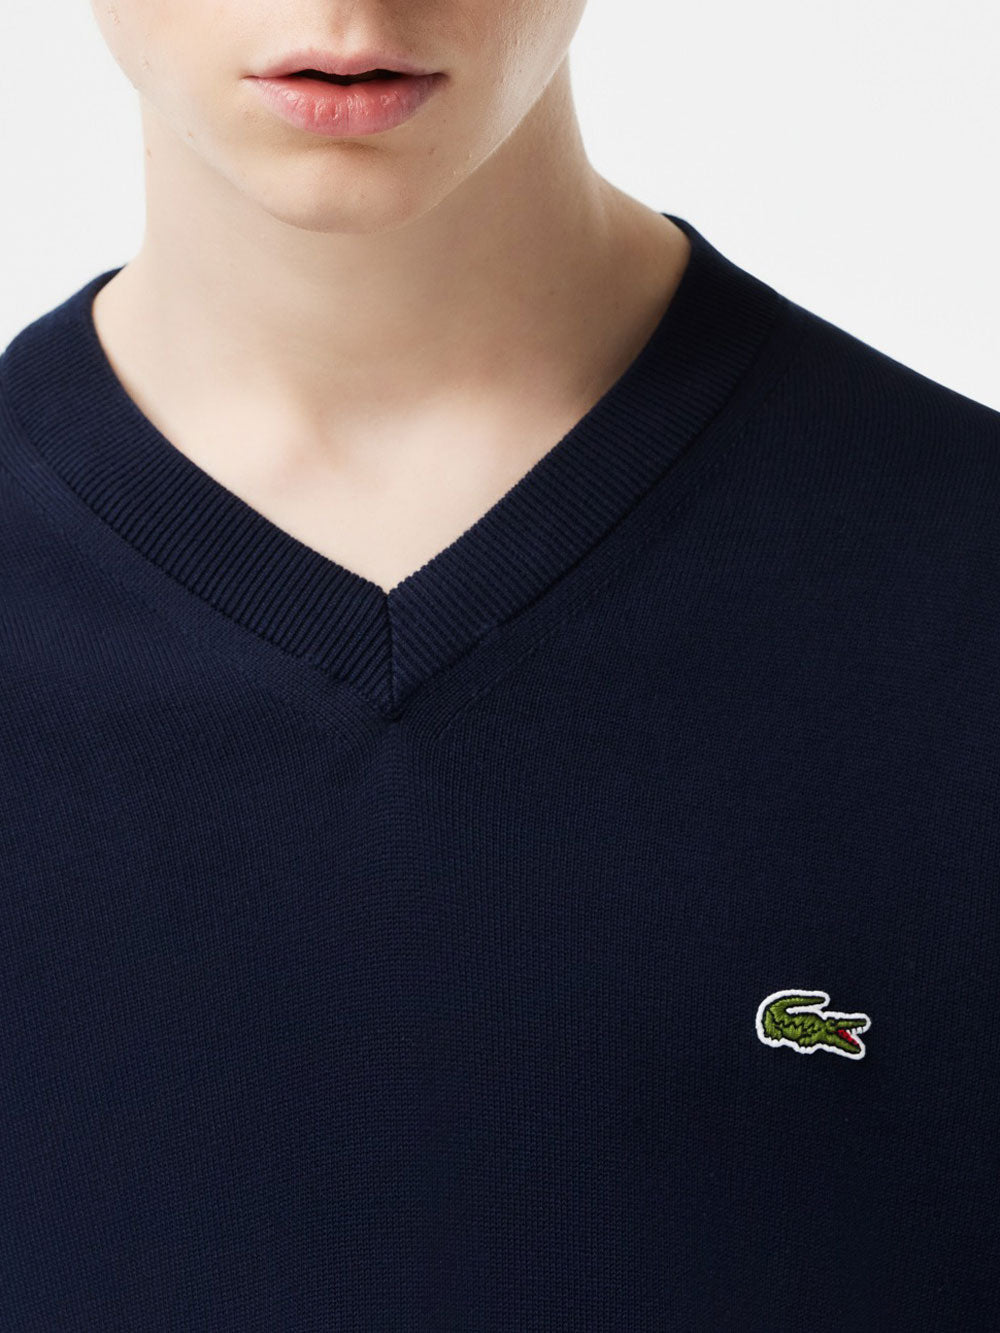 Lacoste Men's Lacoste Pullover - Blue AH1951 | Opportunity Stores